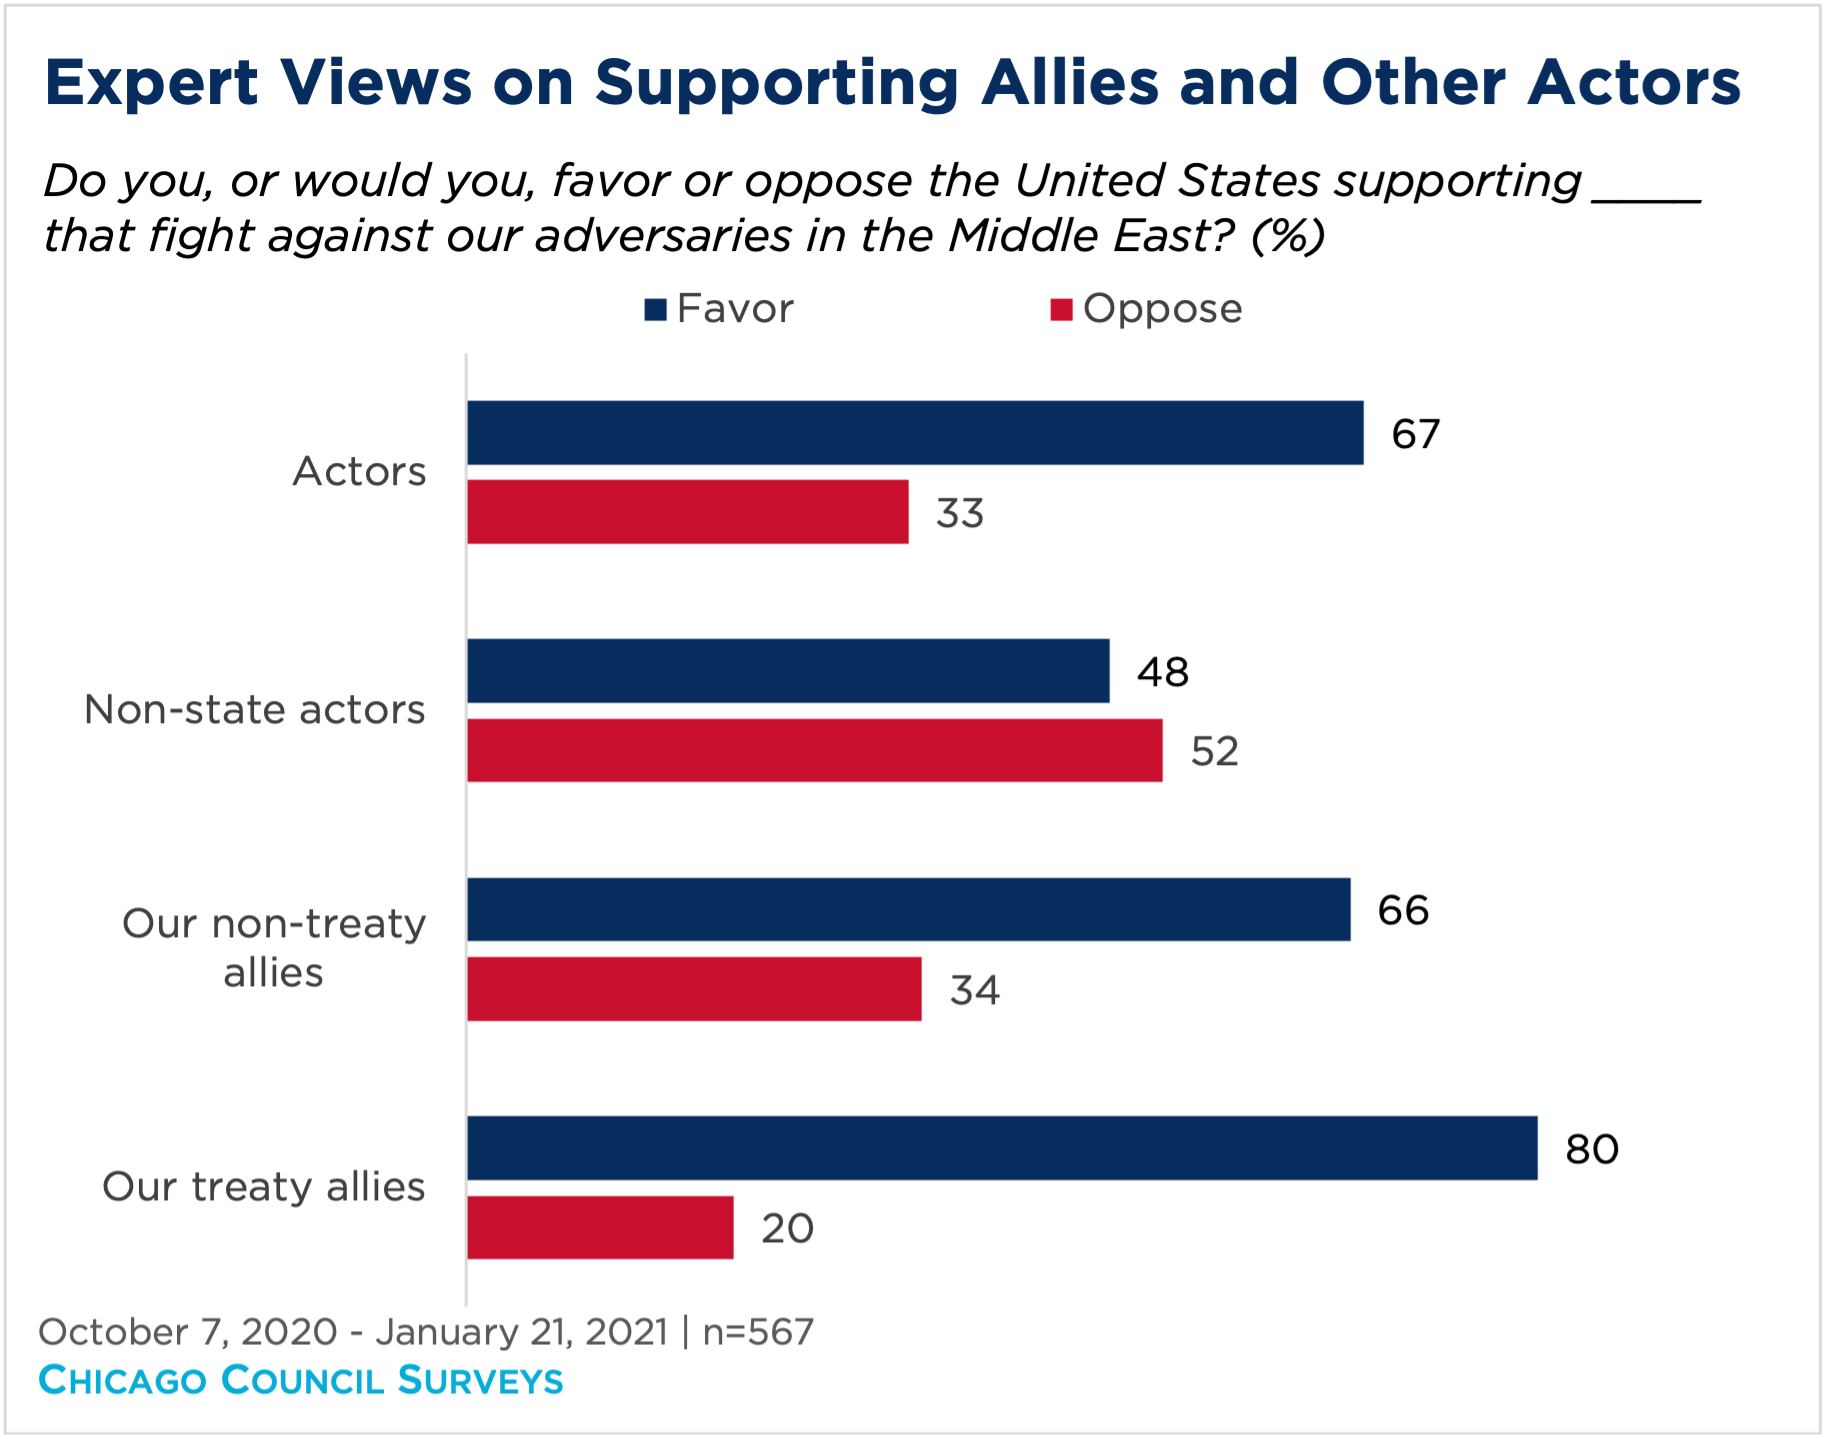 Bar graph showing expert views on supporting allies